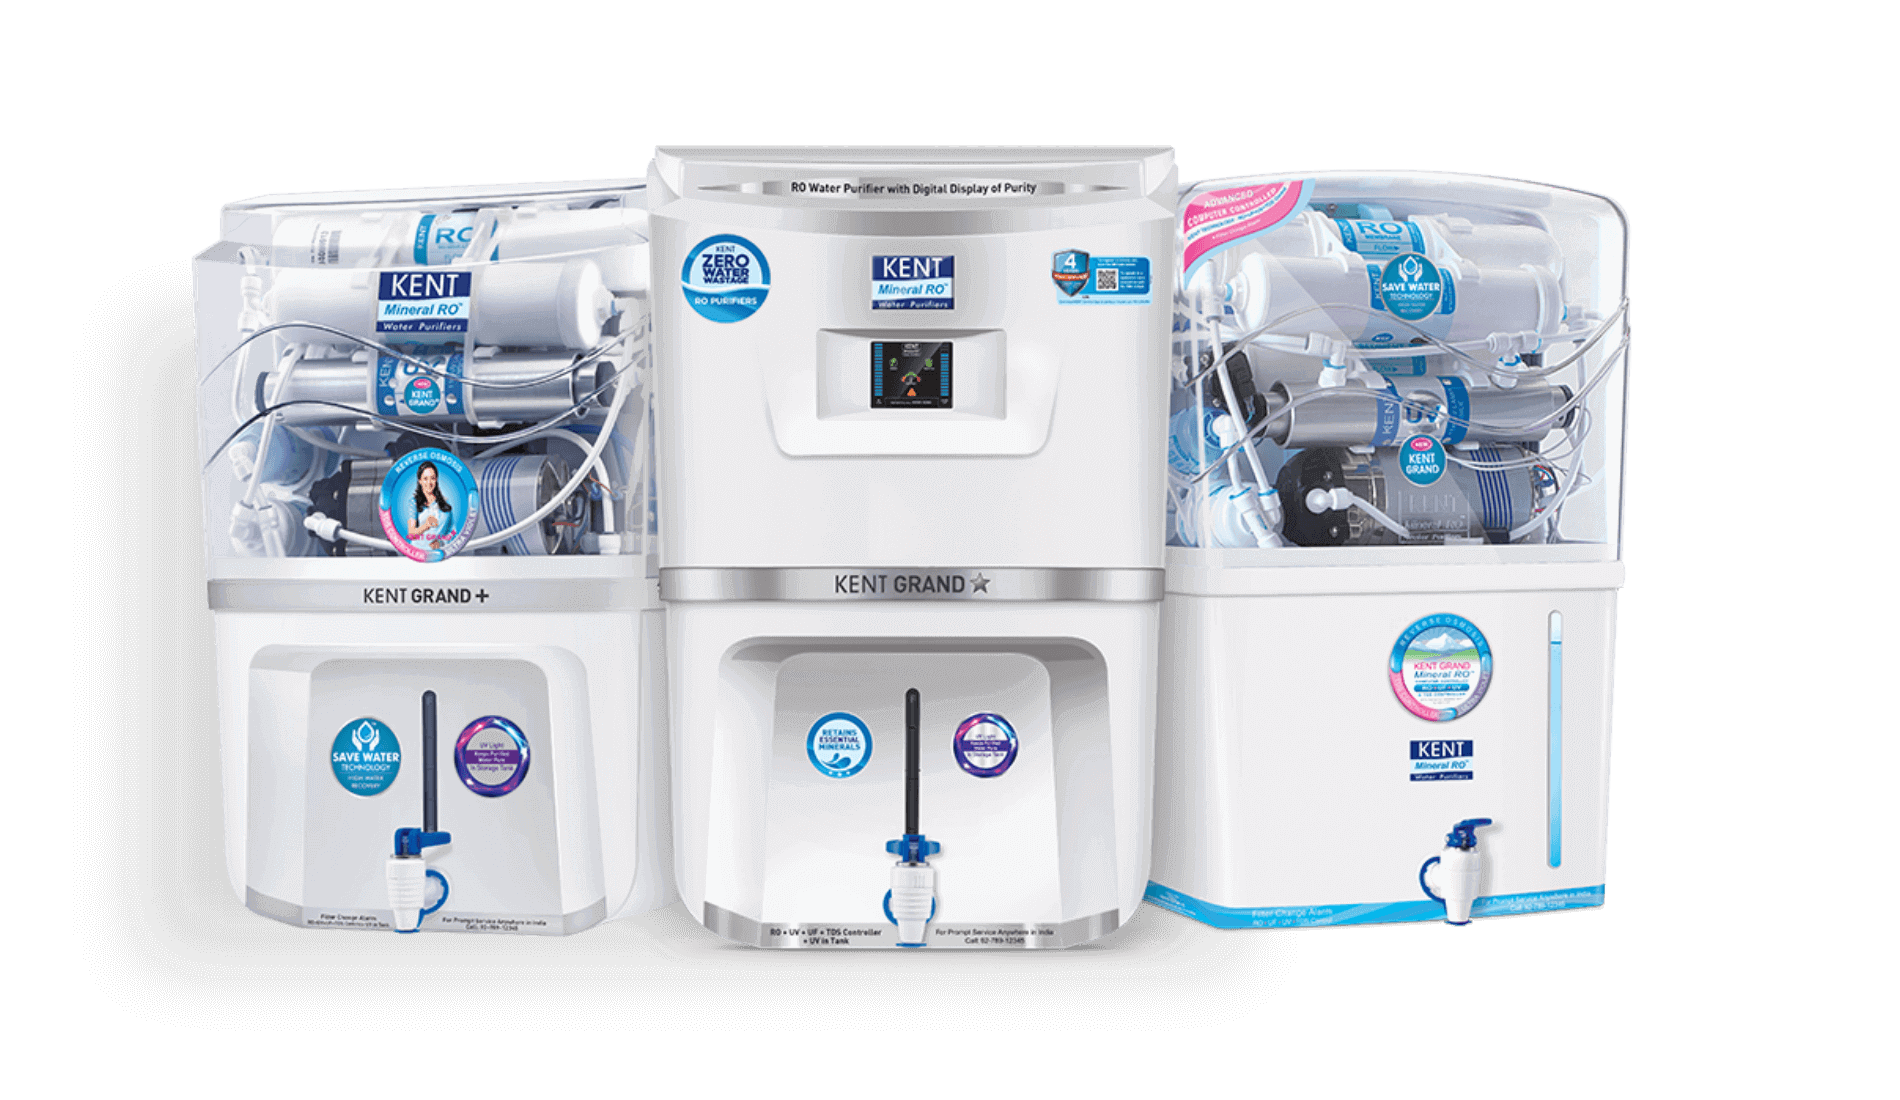 KENT Limited RO Water Purifiers